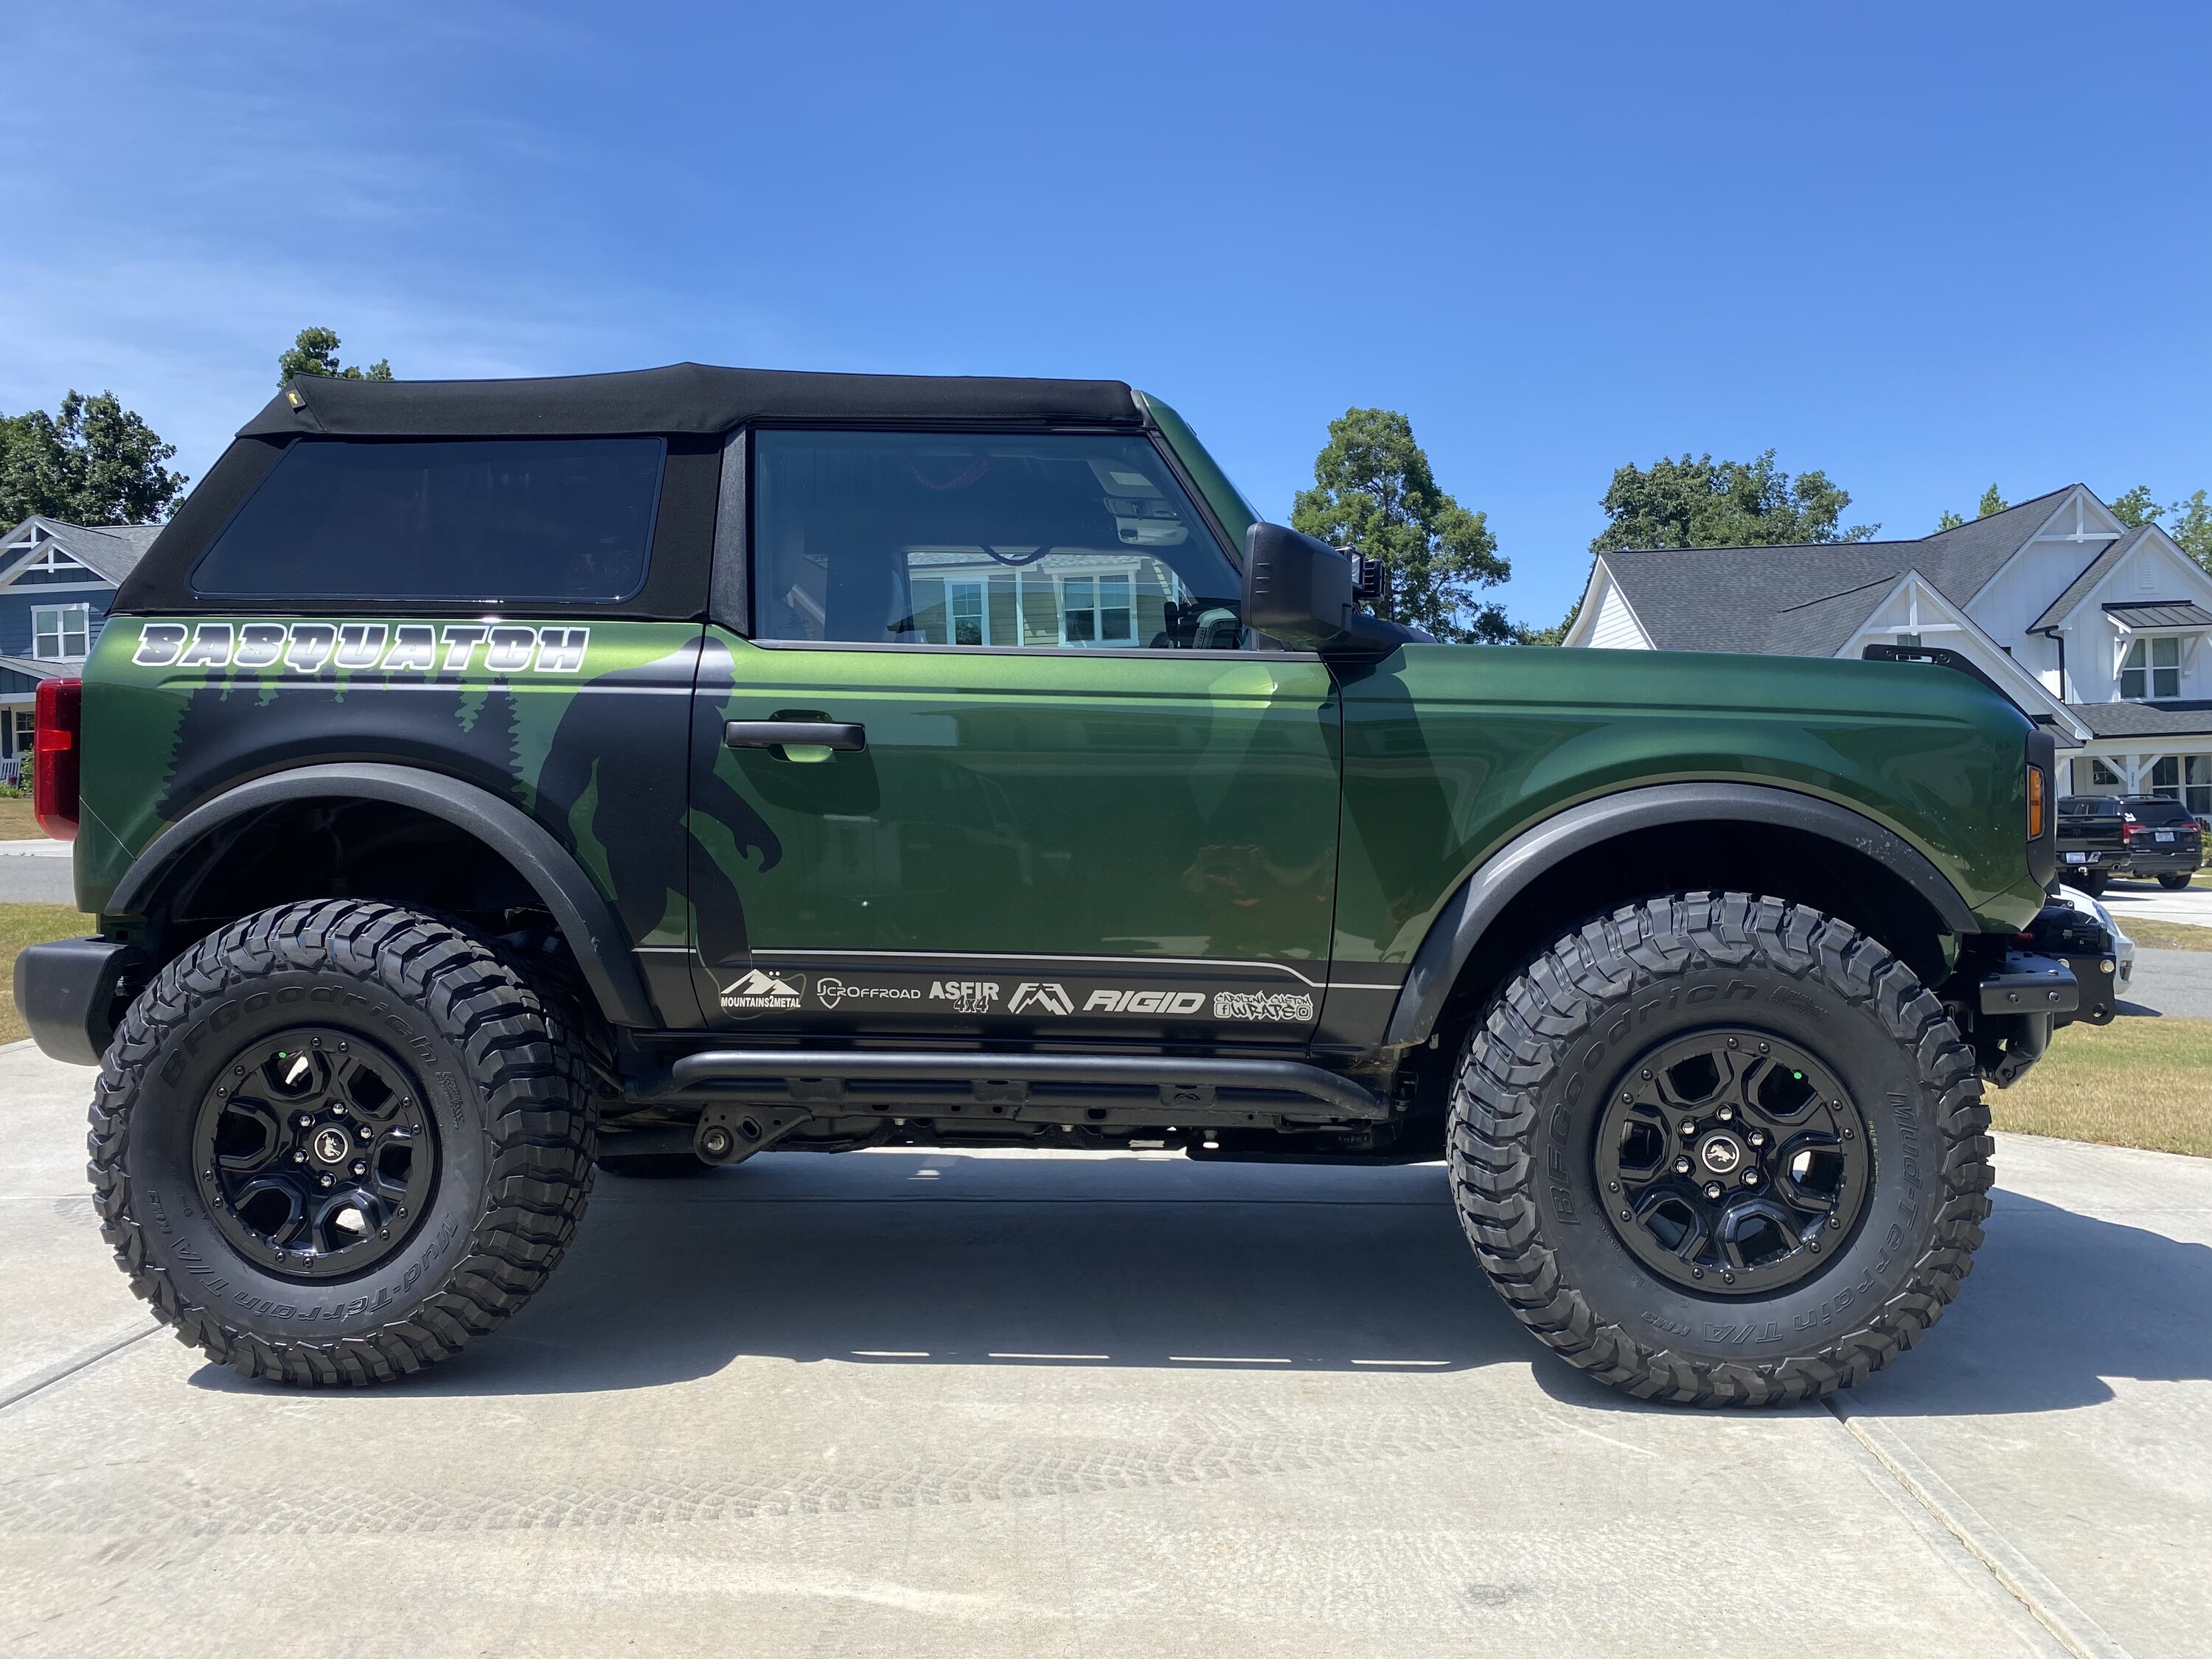 Ford Bronco Let's See Your Wrap Designs! 0366C394-659F-4CCE-896D-8E0CC049B068